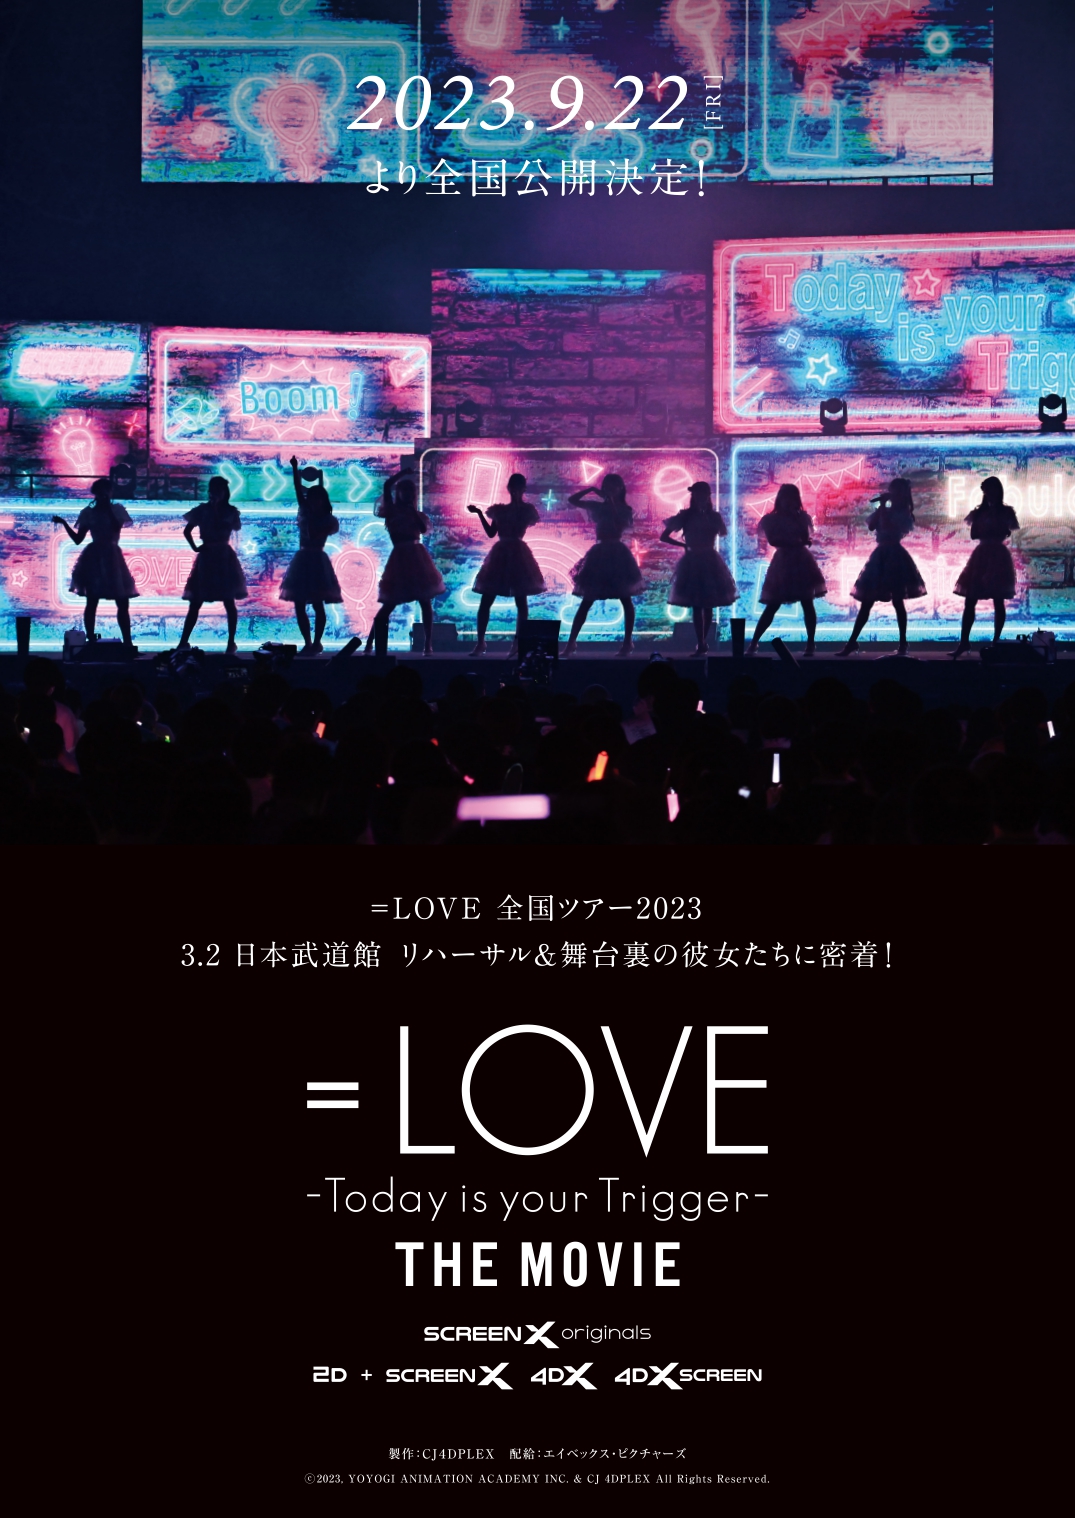 「＝LOVE Today is your Trigger THE MOVIE」